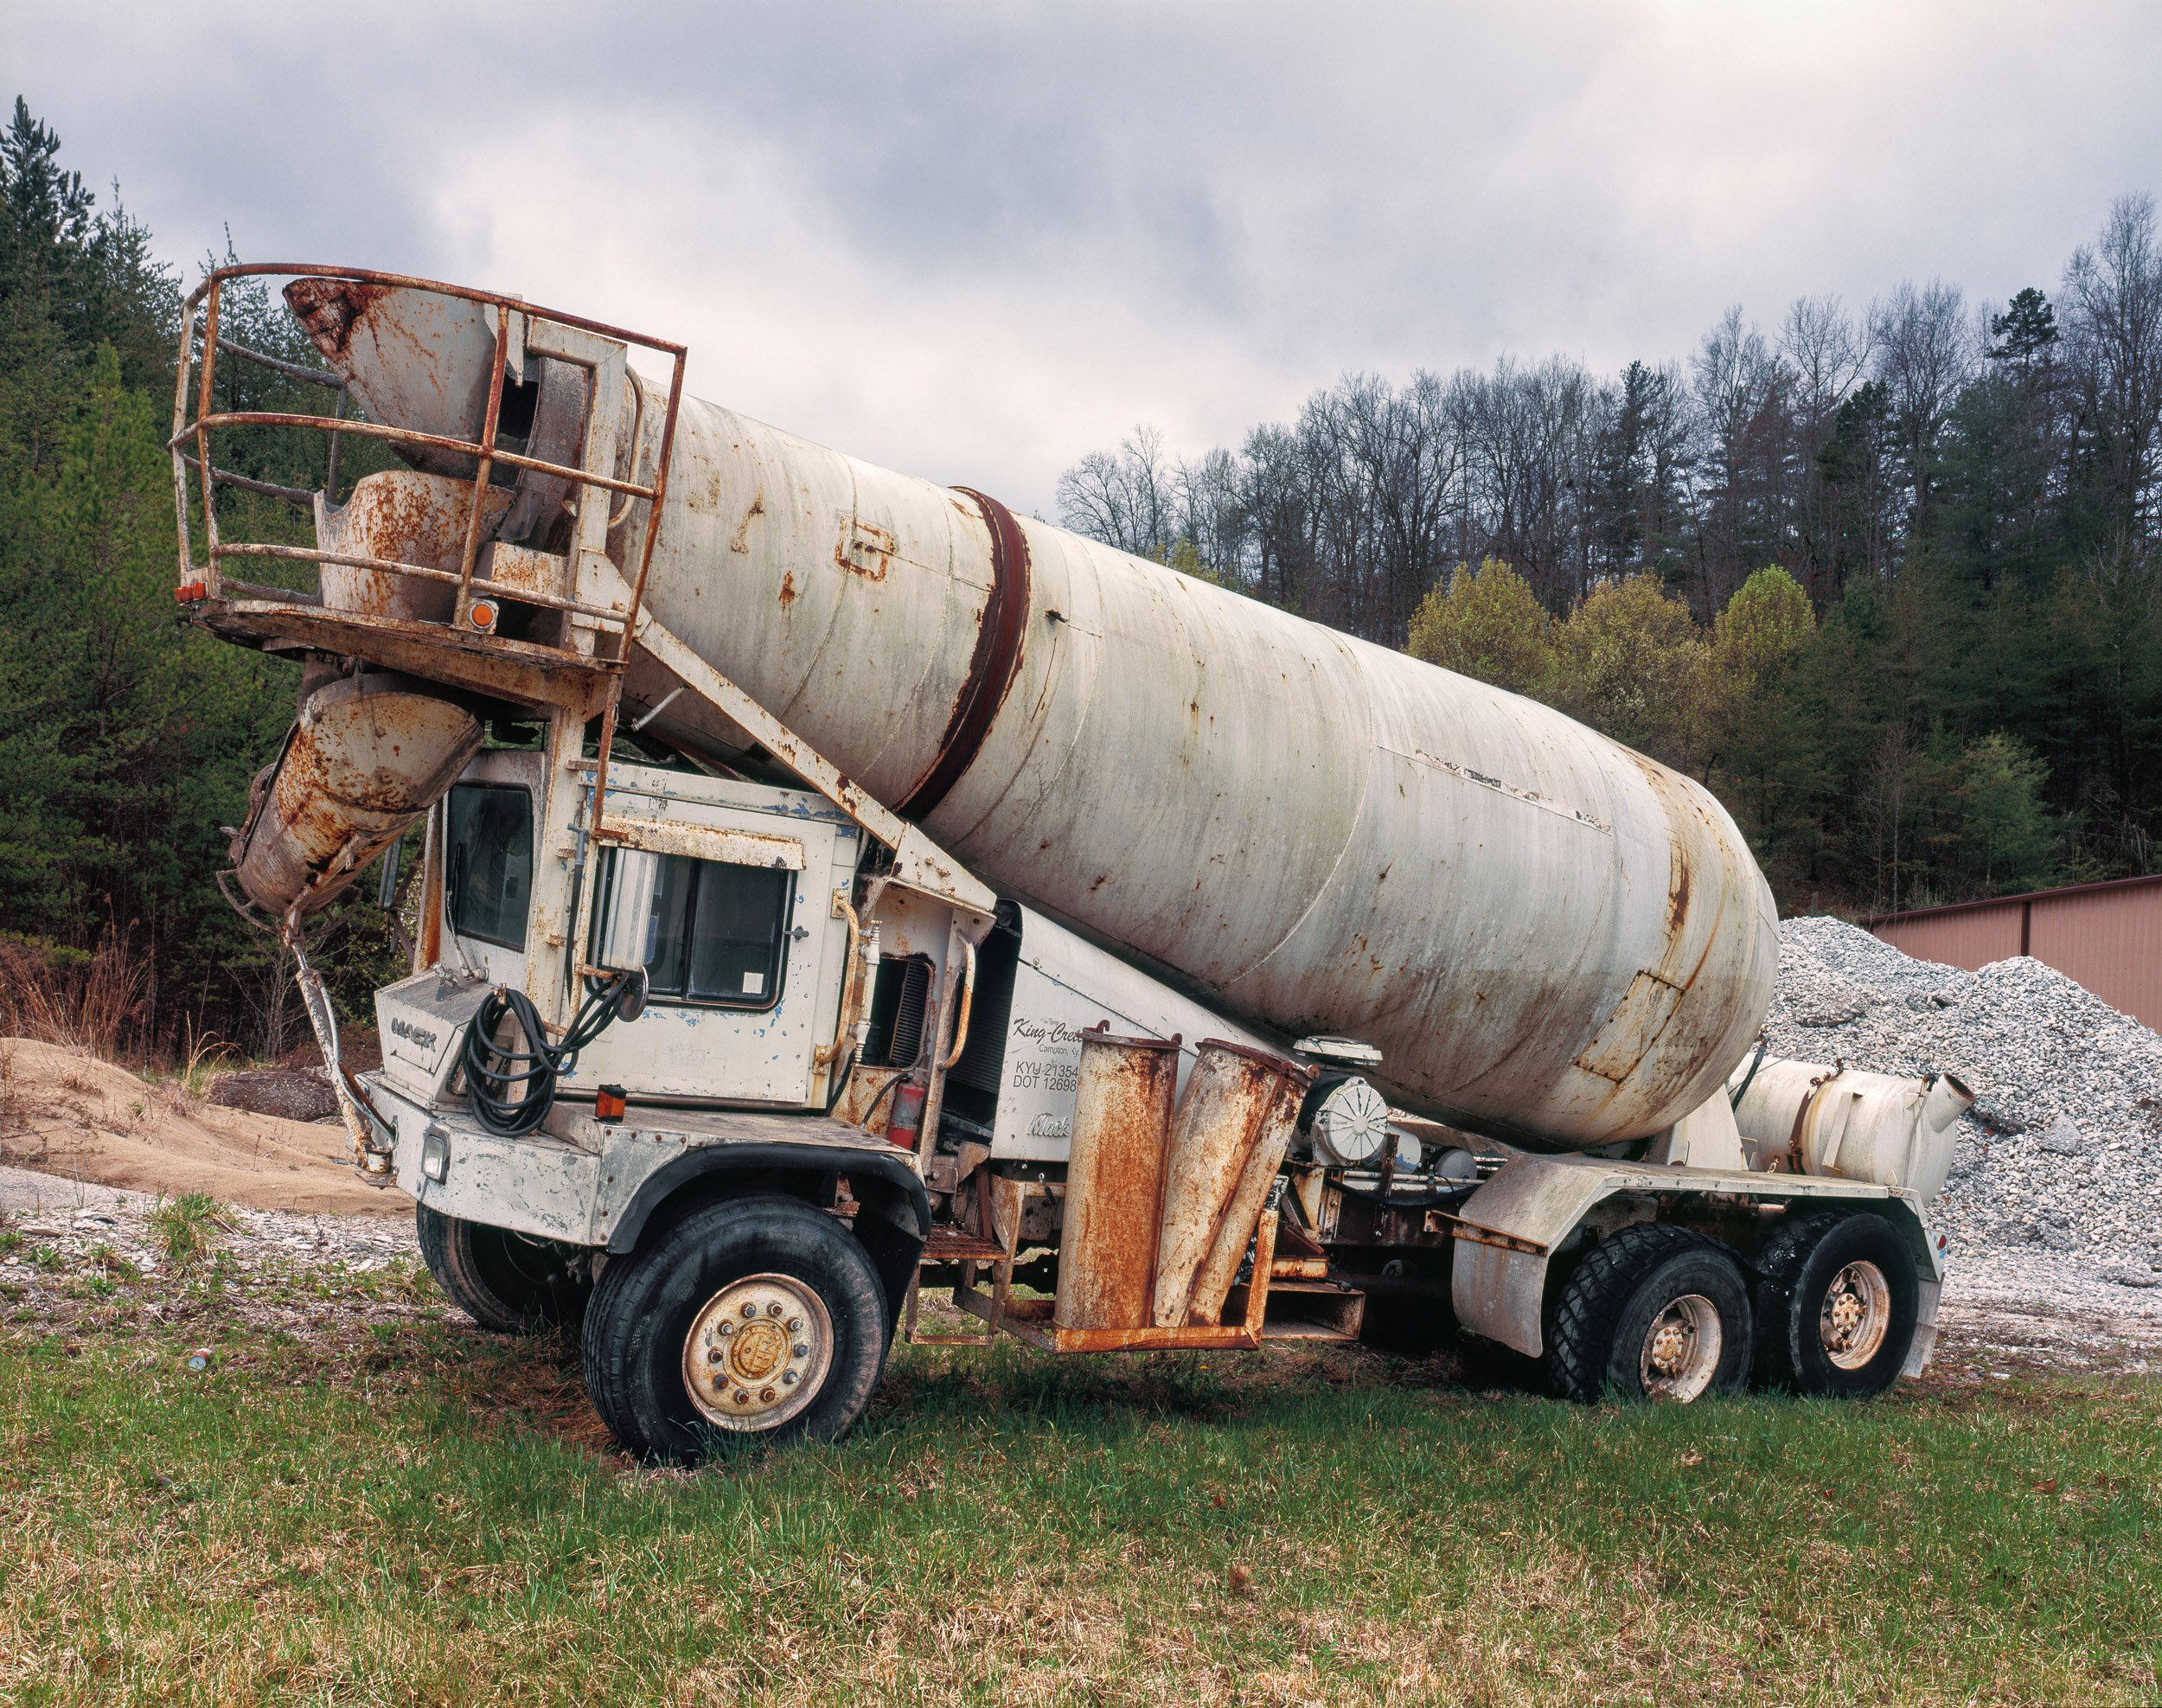 King's Cement Mixer, Wolfe County, Kentucky